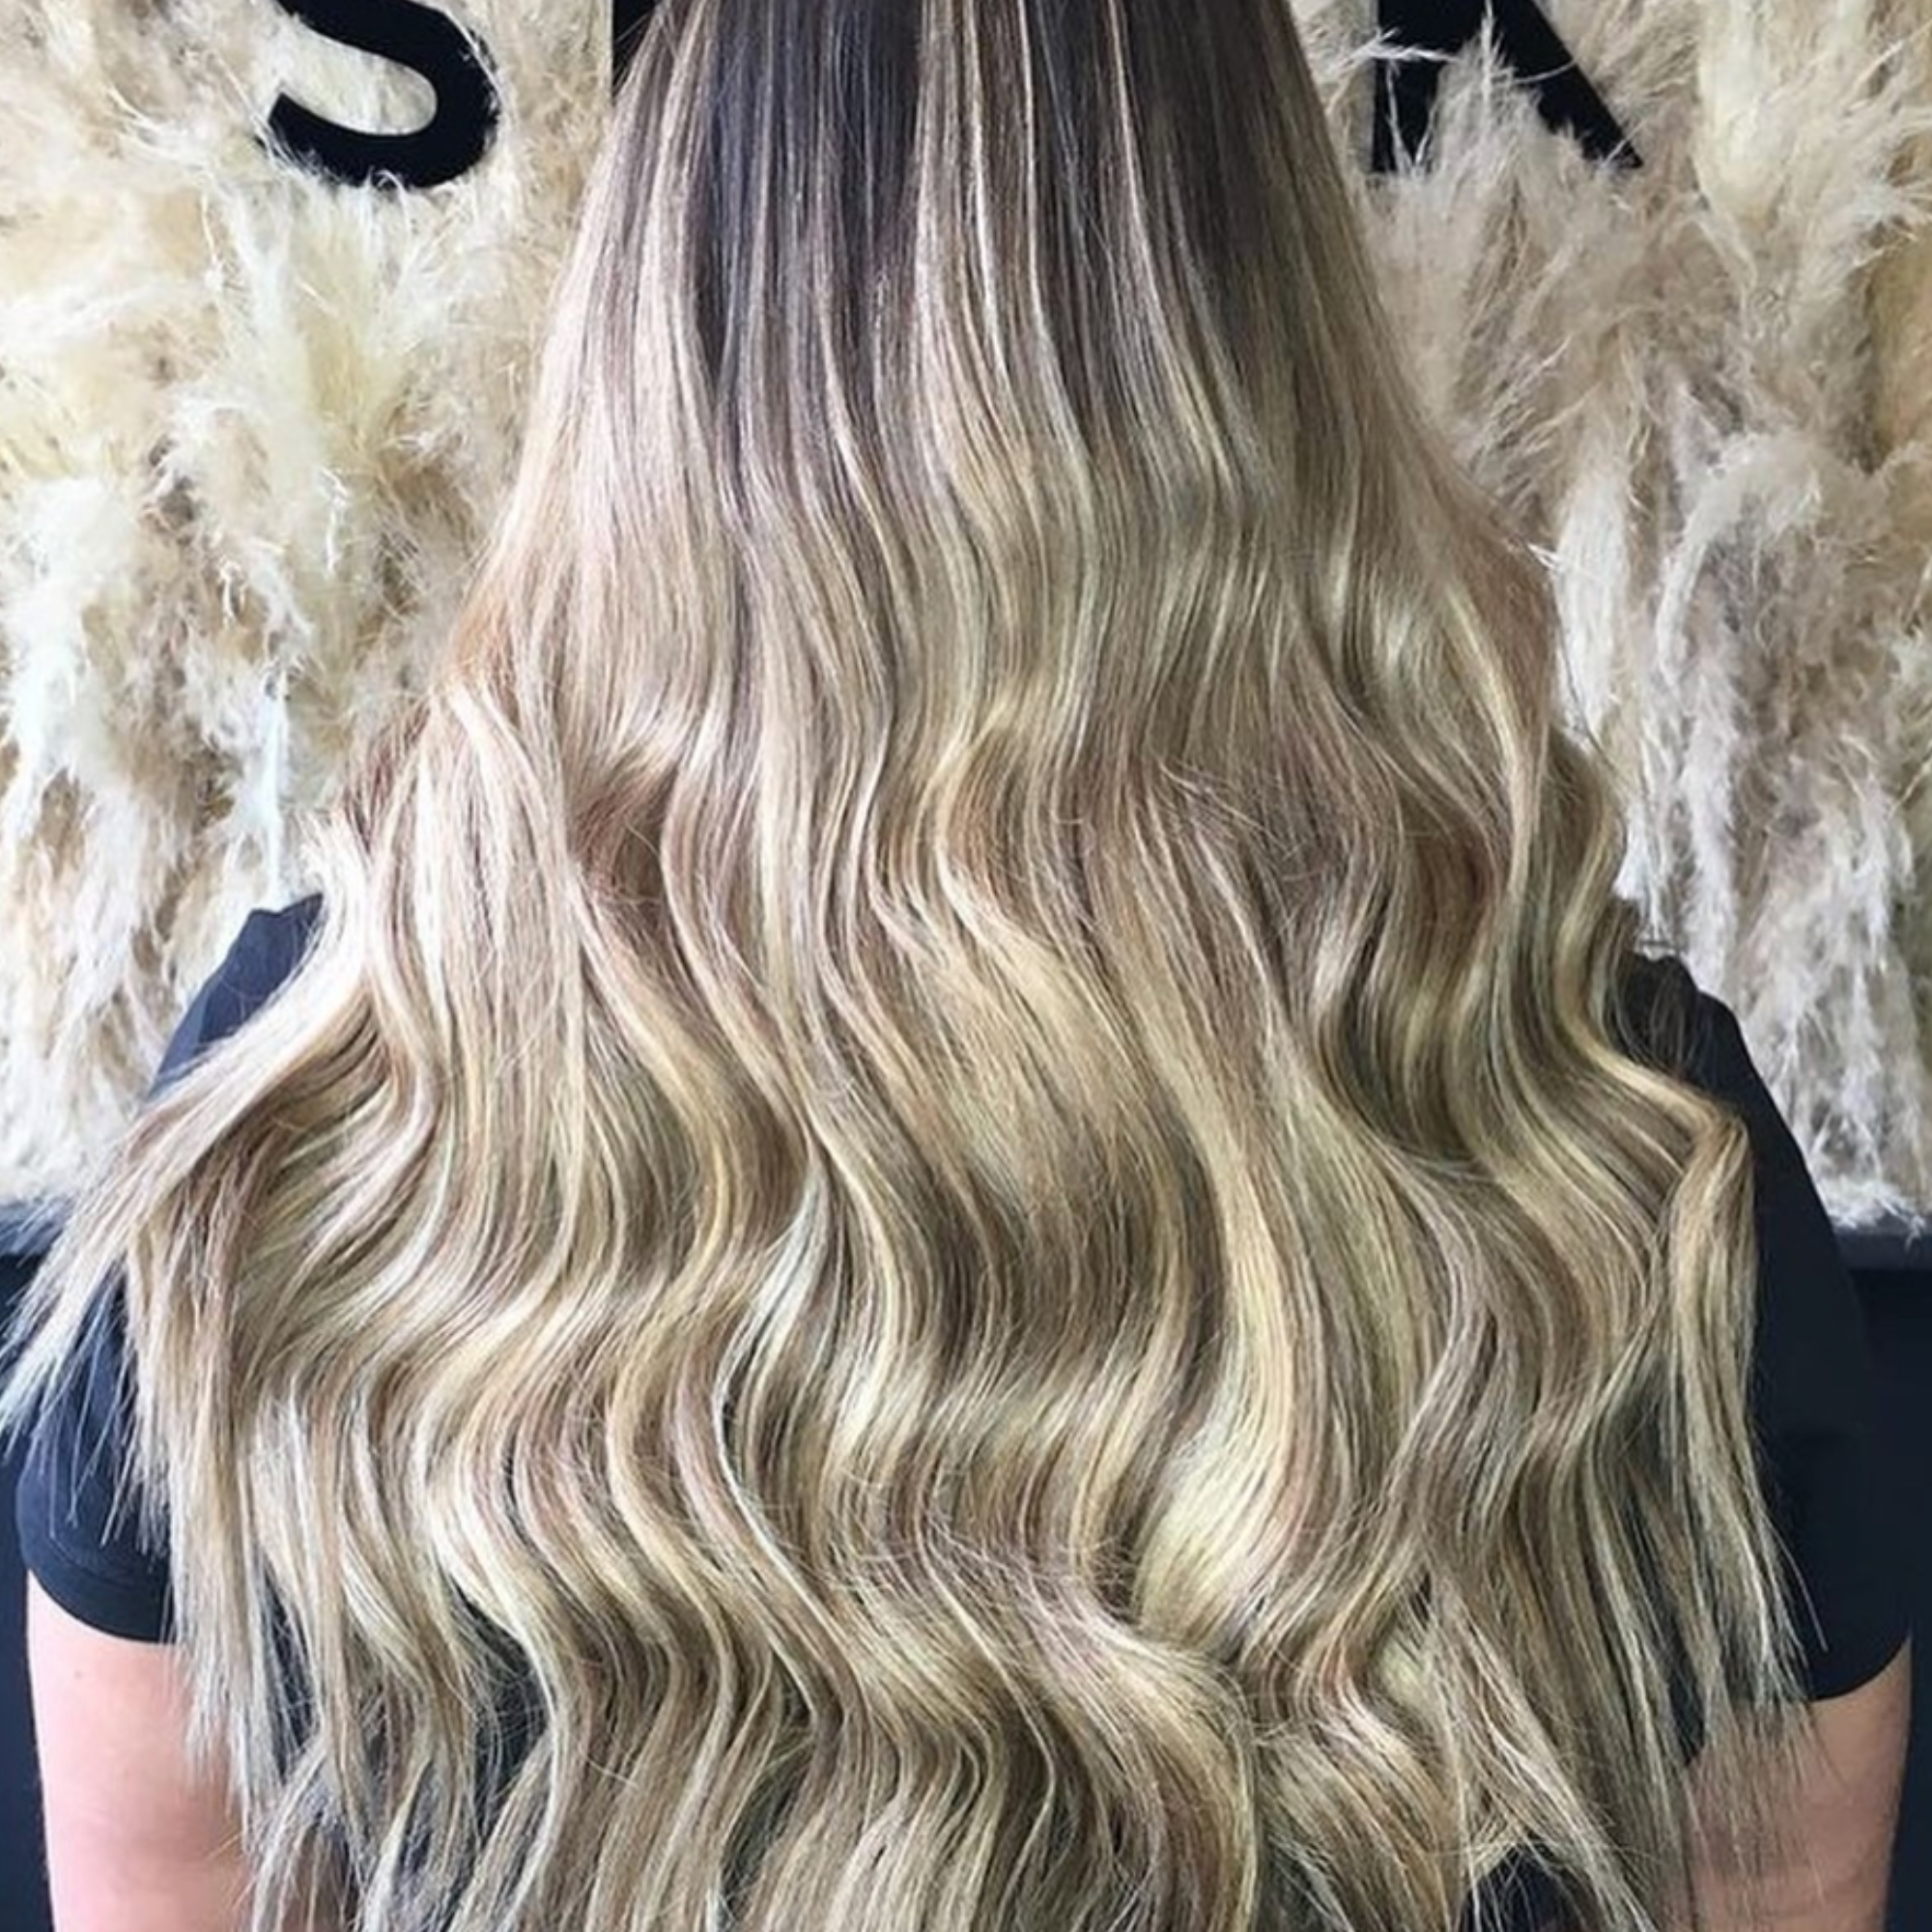 14" Tape Extensions Rooted Coachella